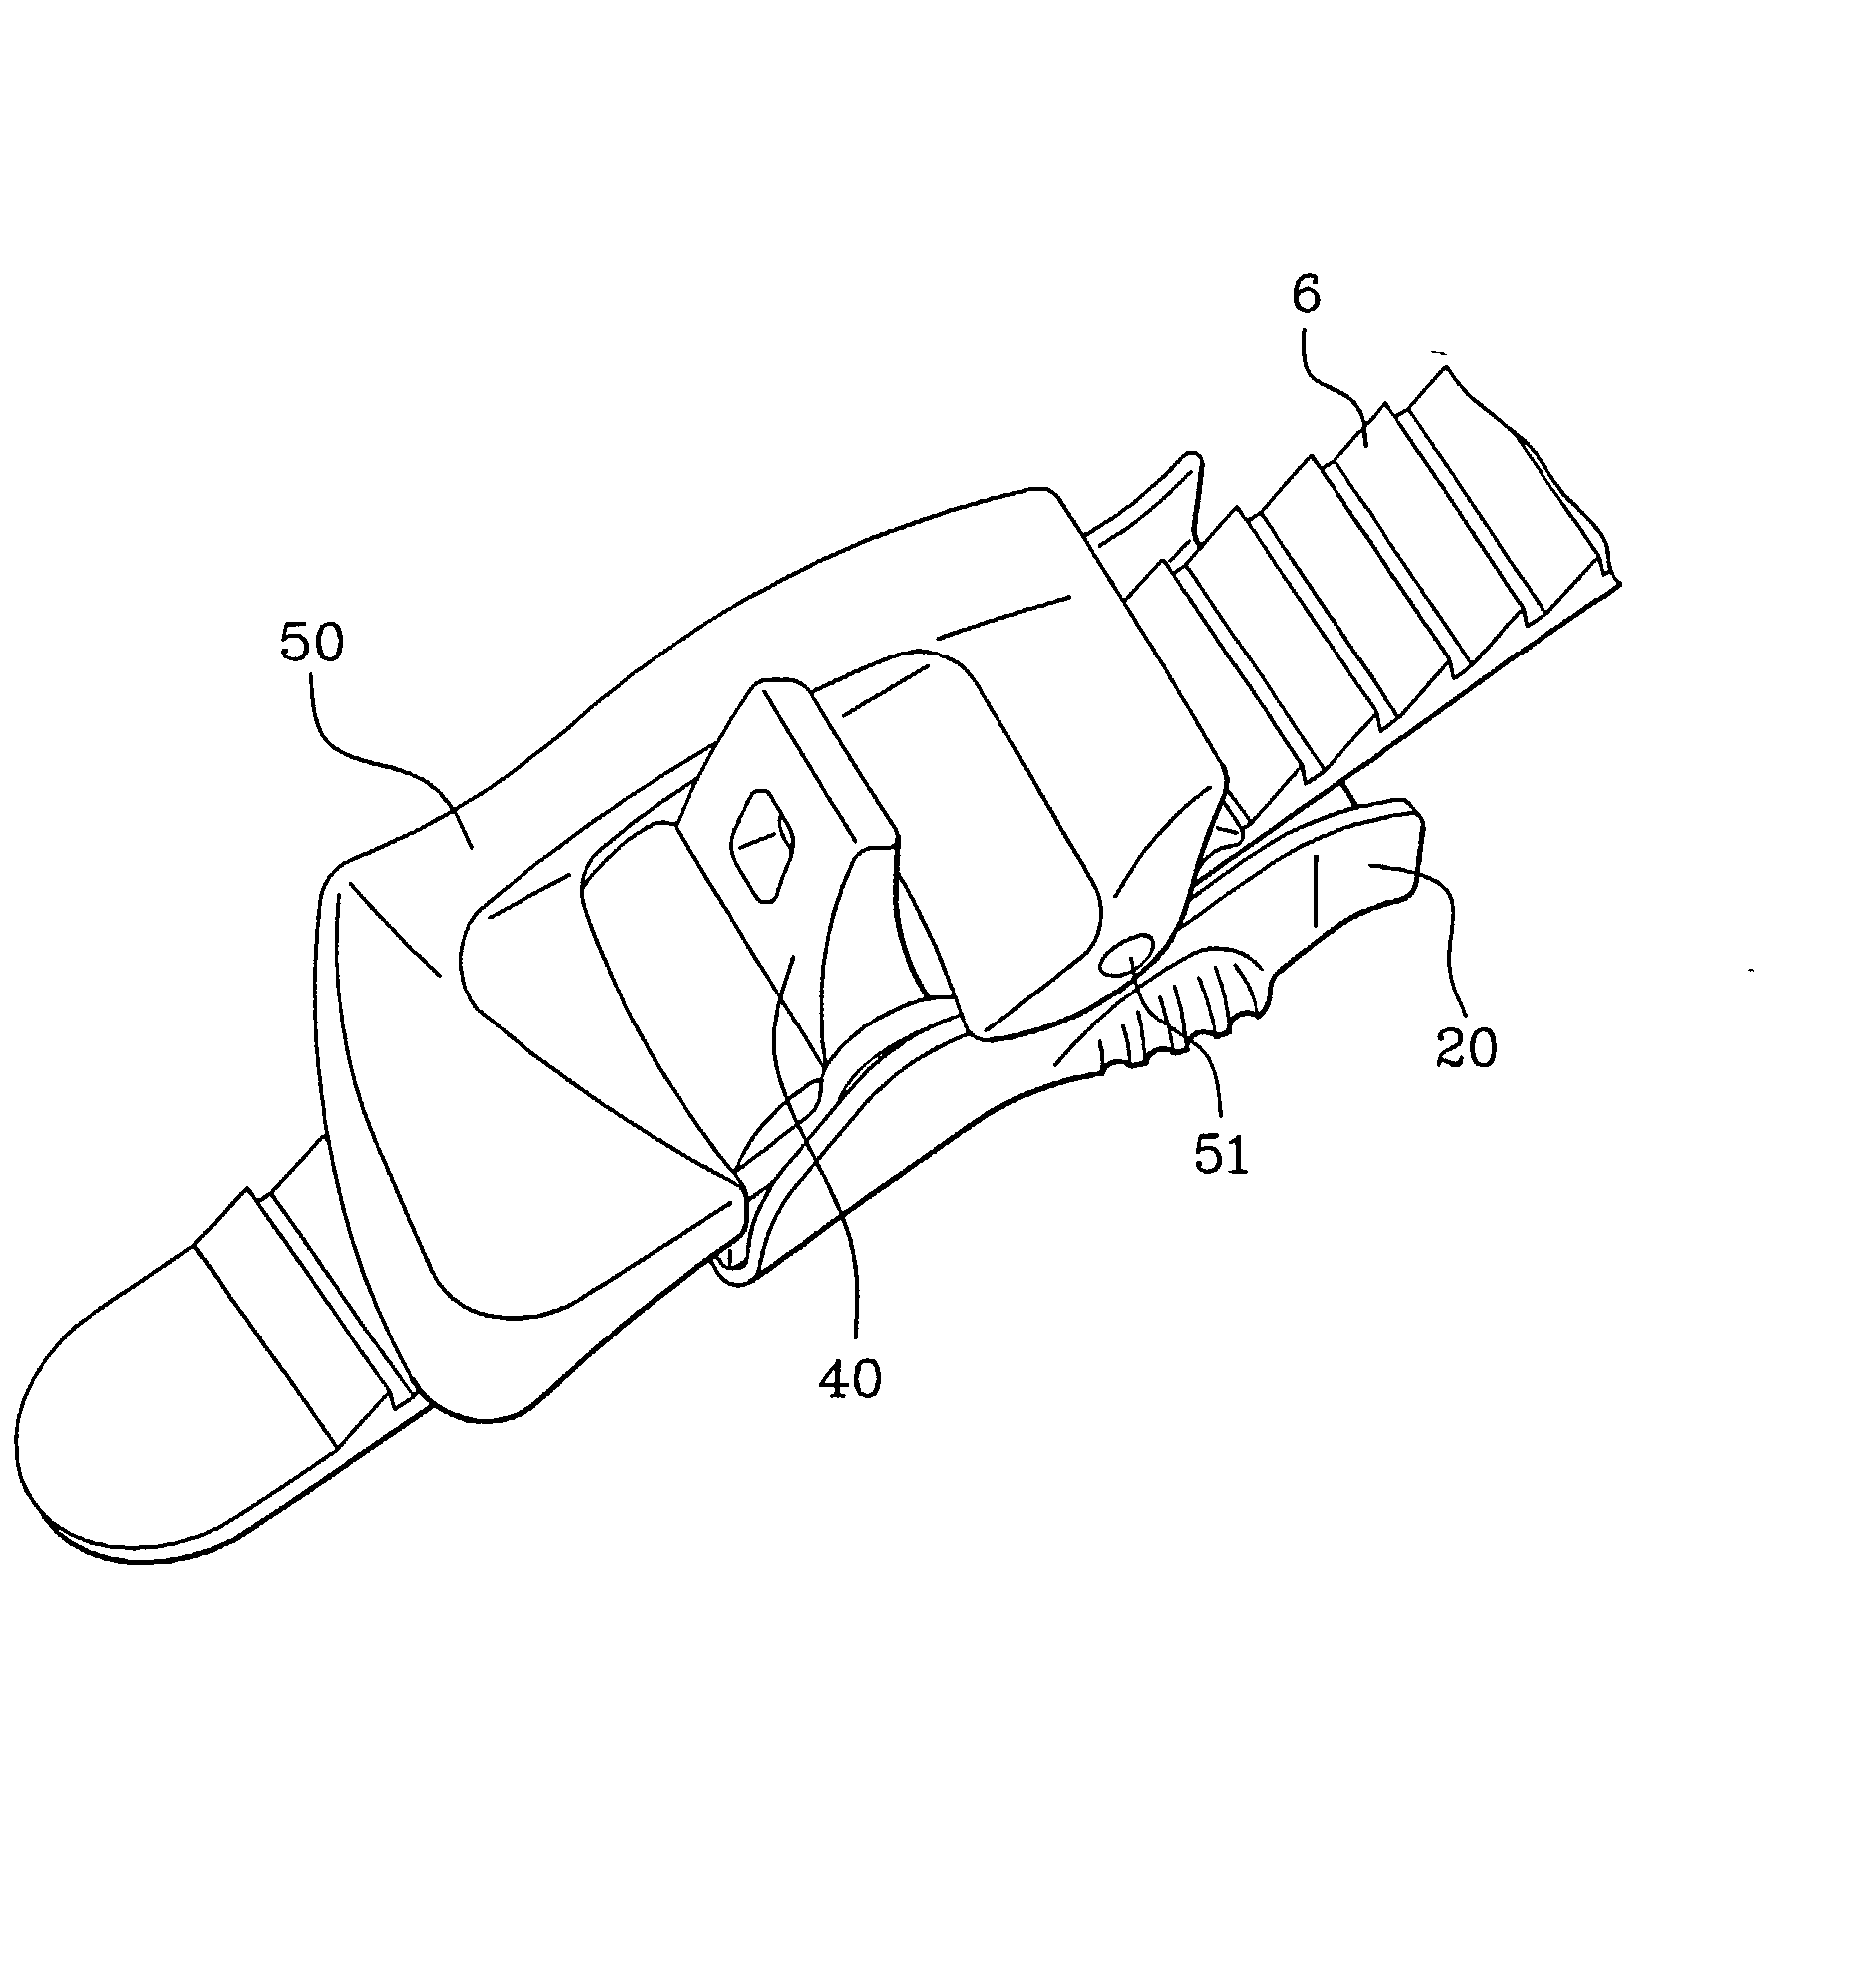 Device for clamping together two parts of a sports article